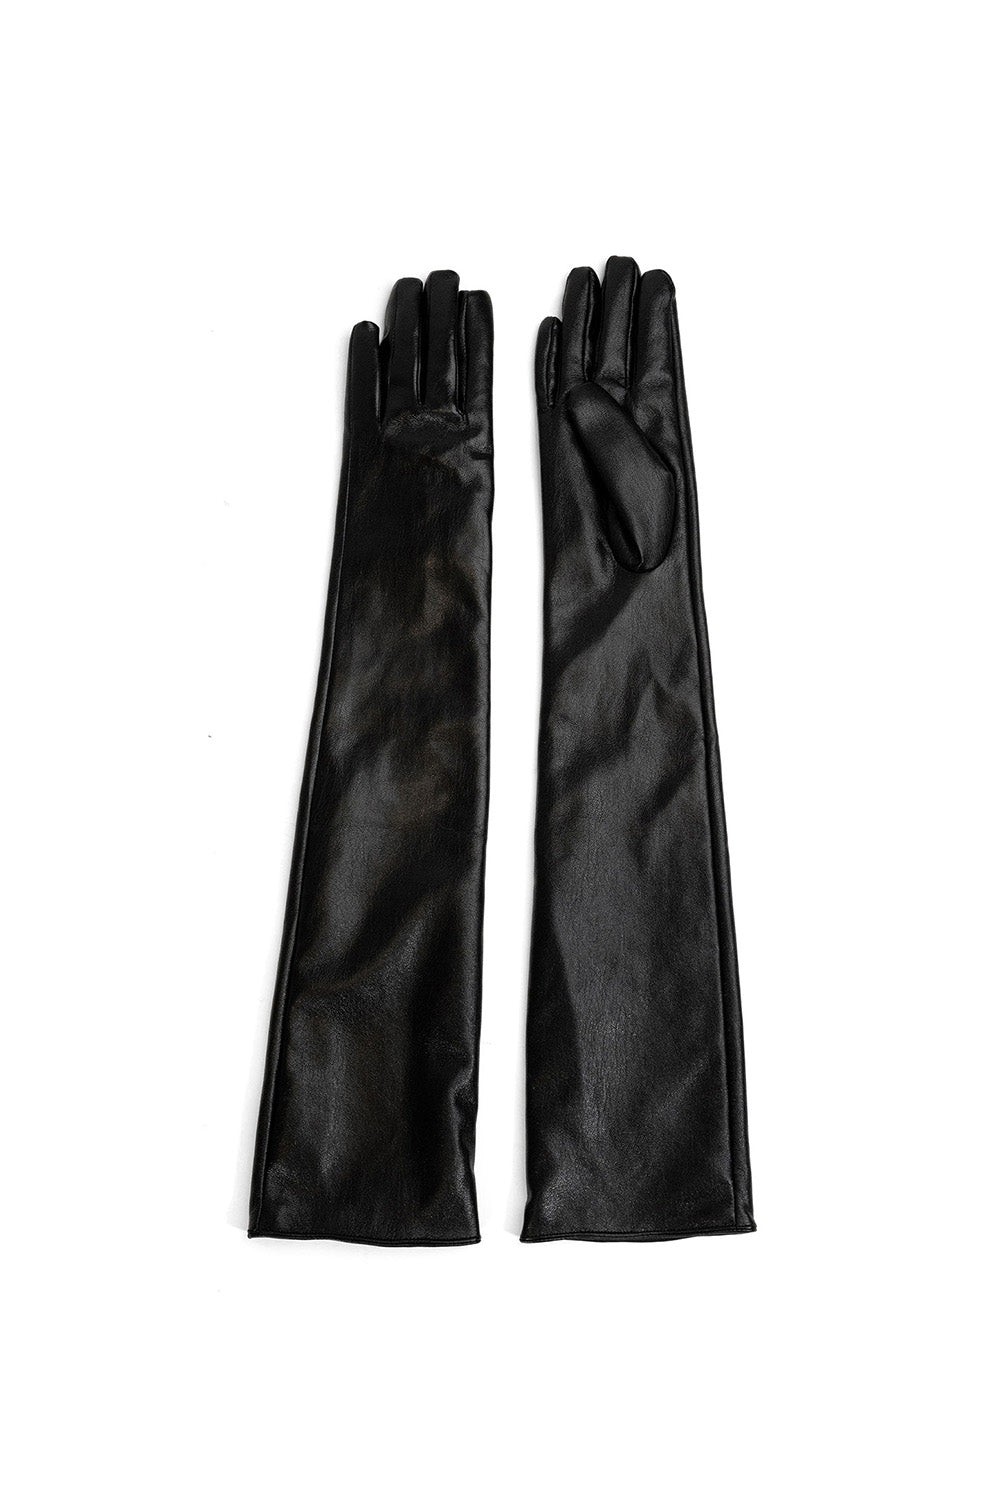 Faux leather Gloves in Black | over the elbow | Women's Accessories | Long Gloves | Autumn | Winter | Party | Occasion | Halloween | Vegan